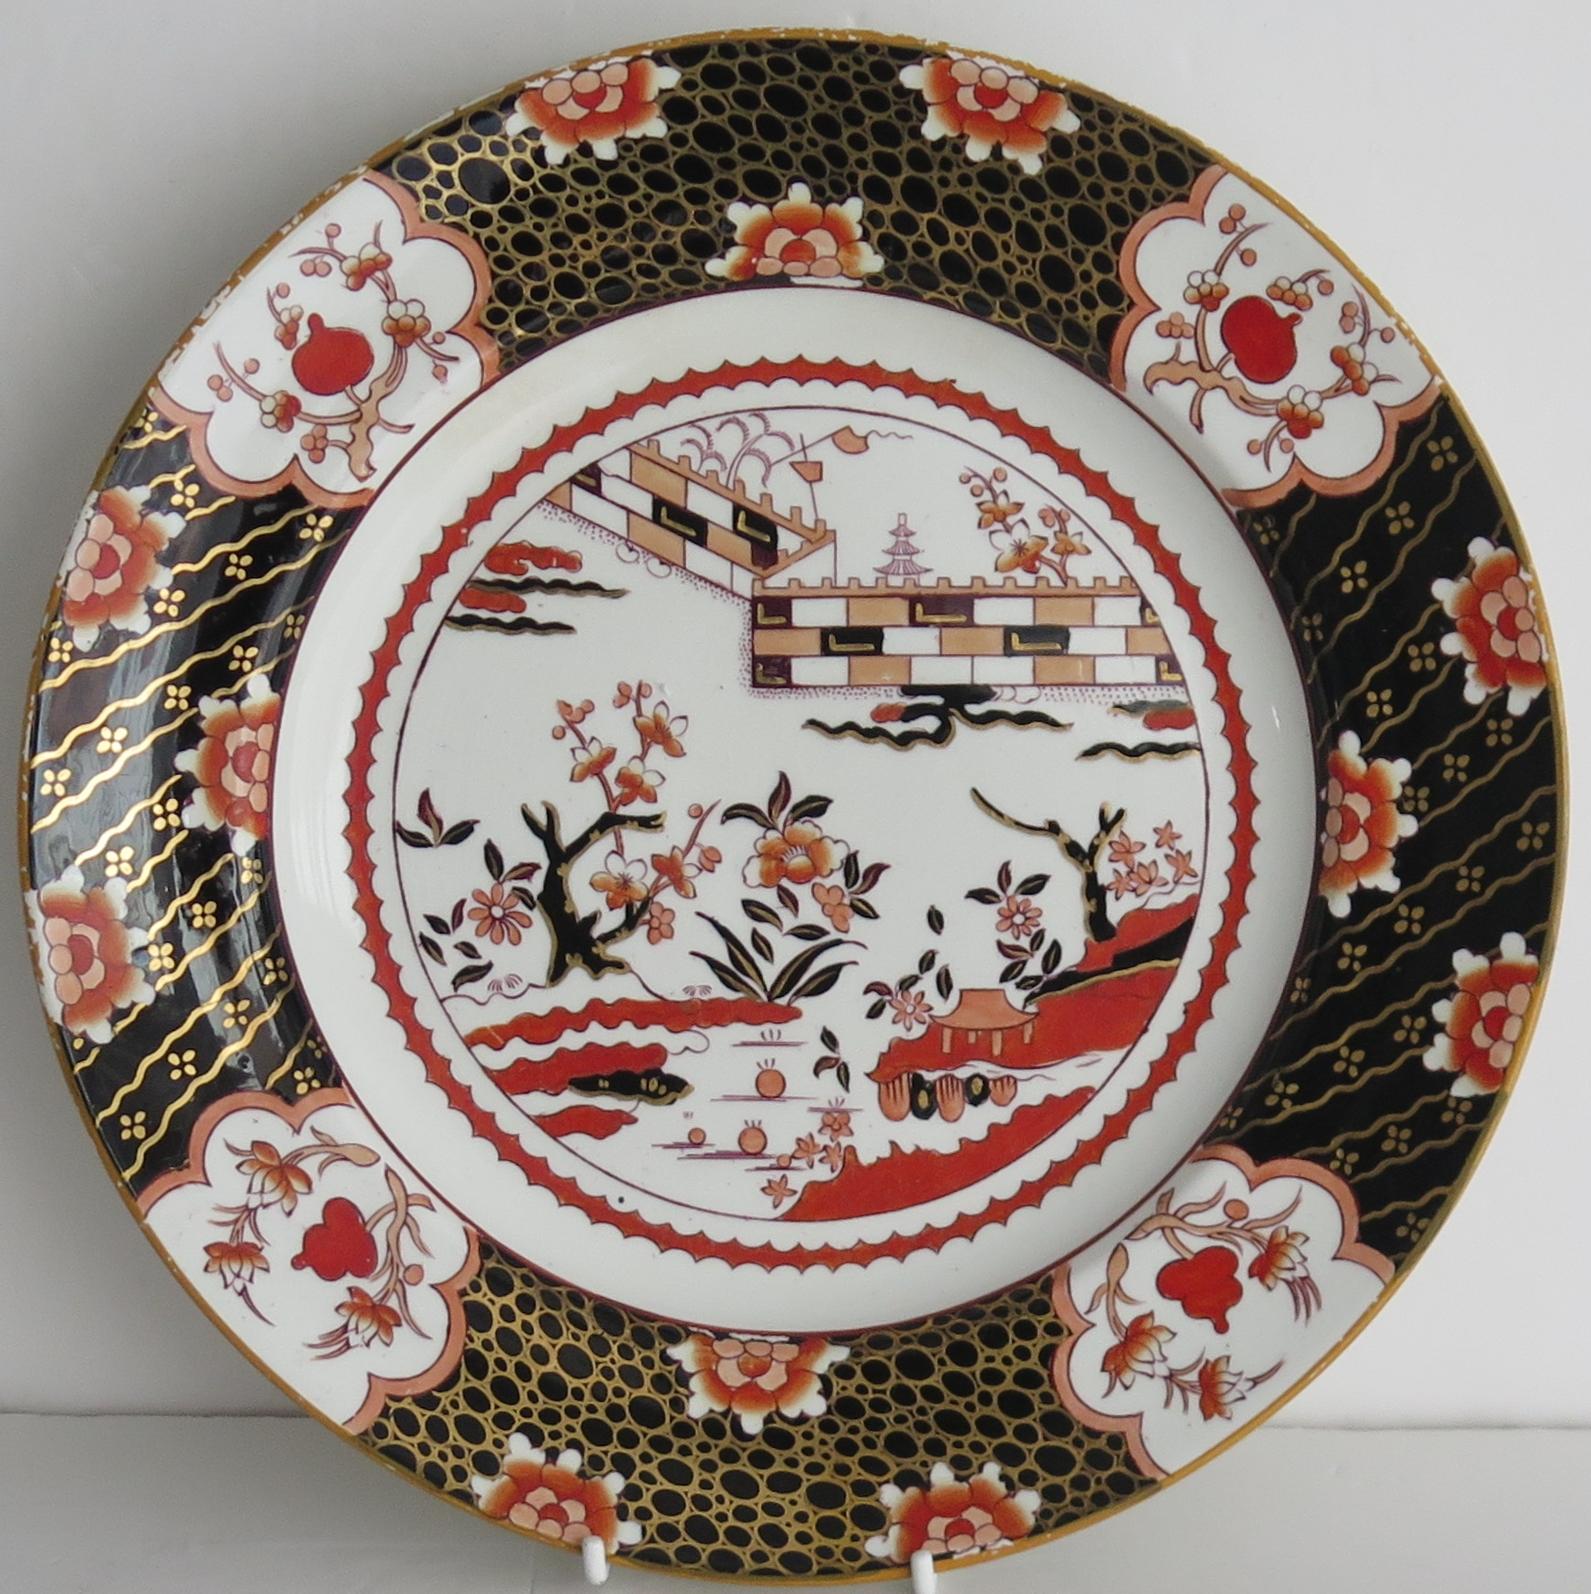 This is a mid-19th century Mason’s patent ironstone Dinner Plate produced at the time when Mason's was owned and controlled by George L Ashworth after the bankruptcy of C J Mason in 1848.

This large plate is decorated in a striking chinoiserie